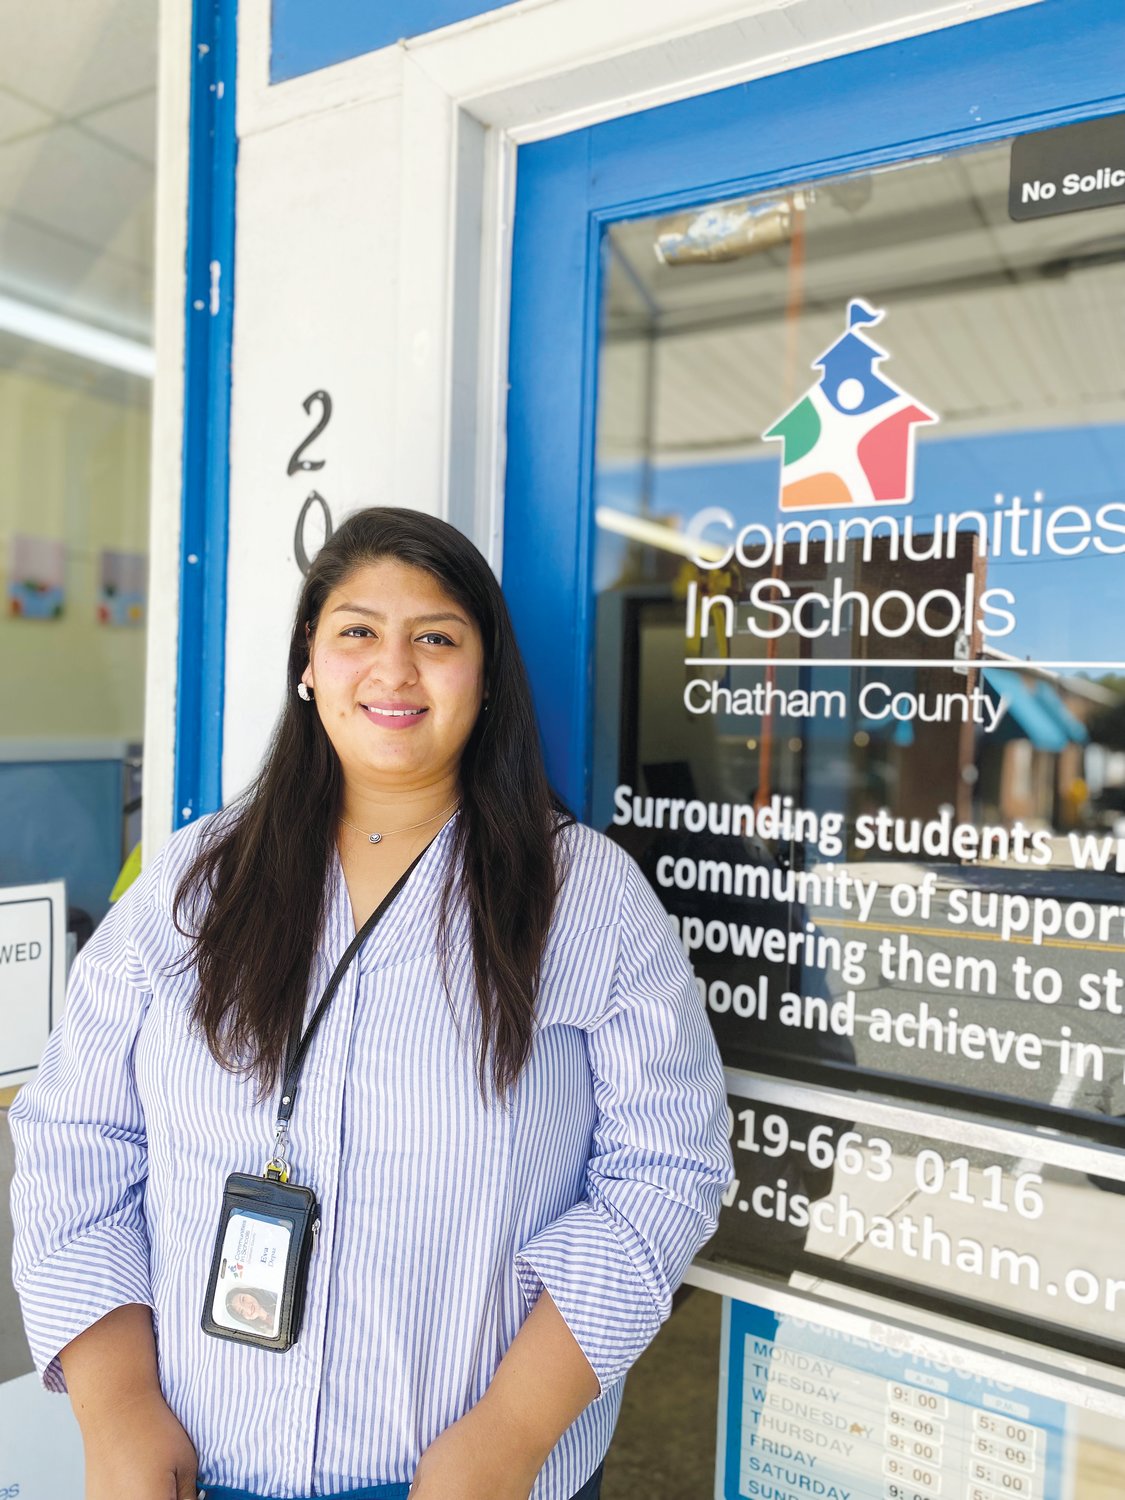 Eva Depaz, a student support specialist at Virginia Cross Elementary School, outside of CIS-Chatham's office in downtown Siler City. She joined CIS in August.